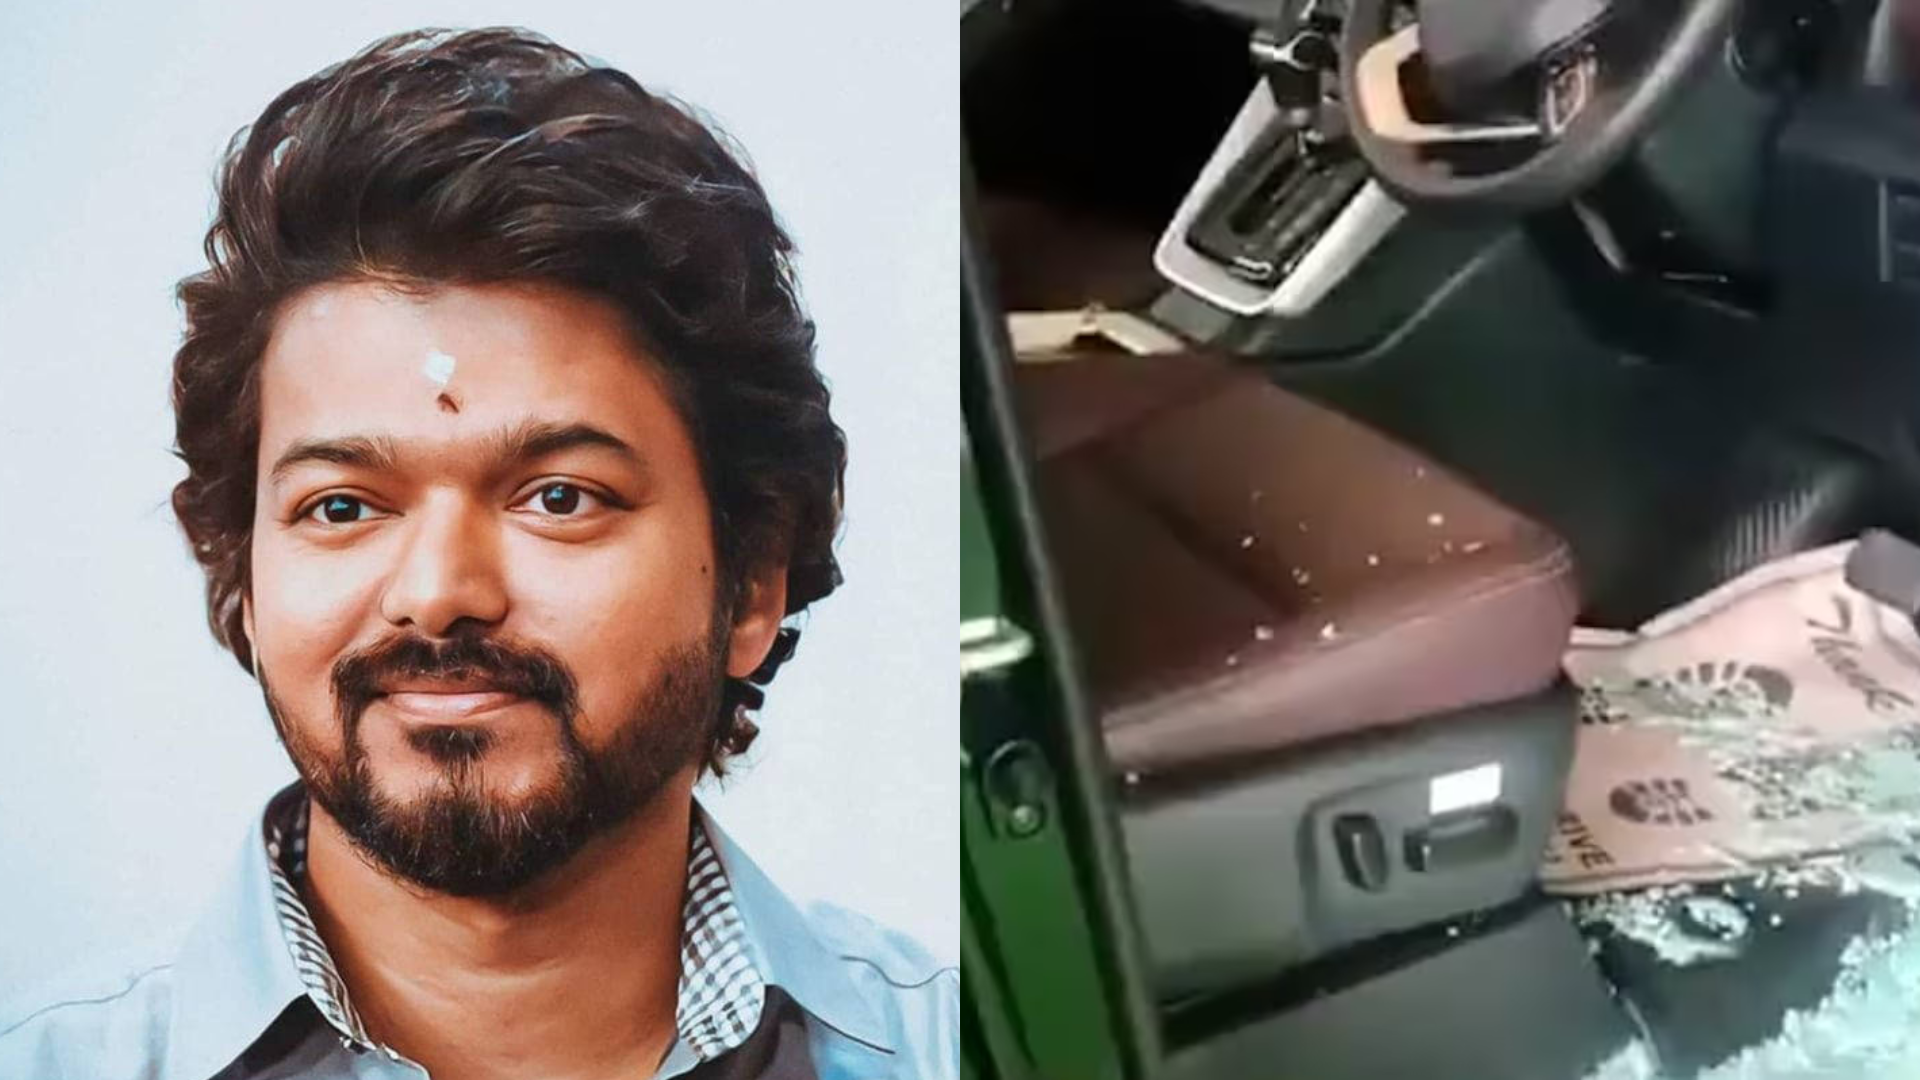 Thalapathy Vijay’s Car Gets Damaged By Massive Sea Of Fans After He Visits Kerala After A Gap Of 14 Years